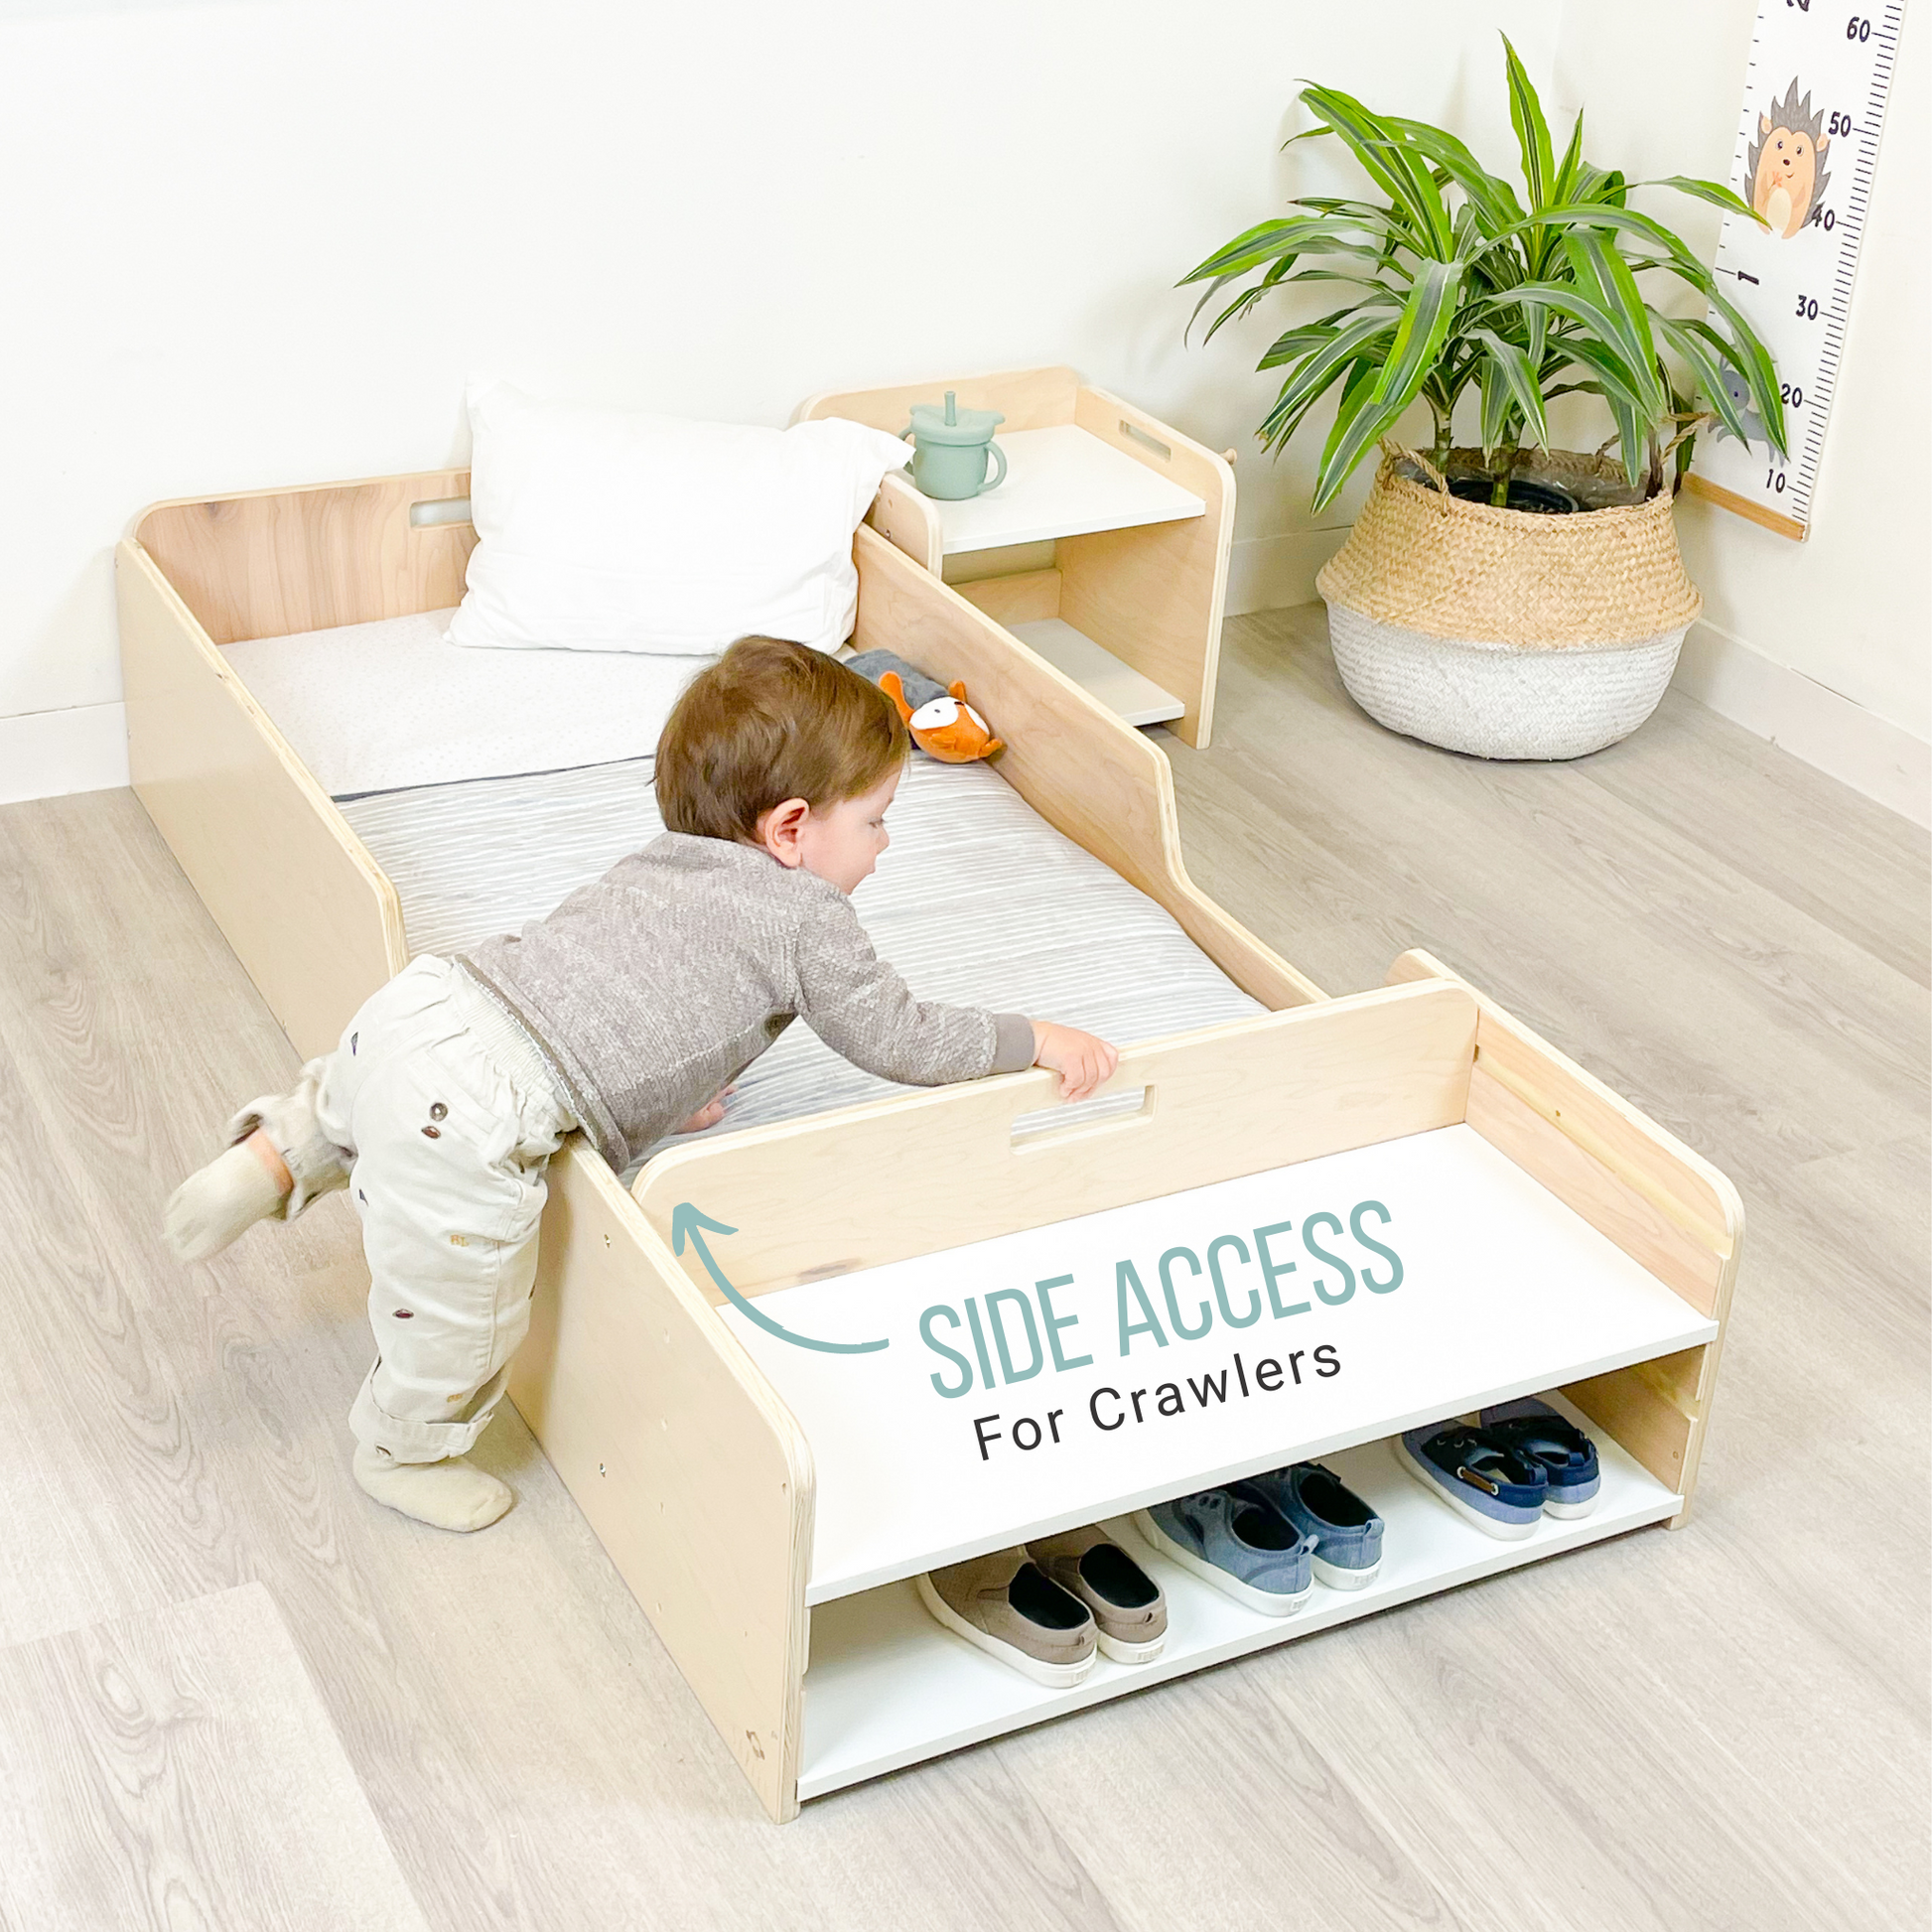 Montessori bed for toddlers and kids bedroom1